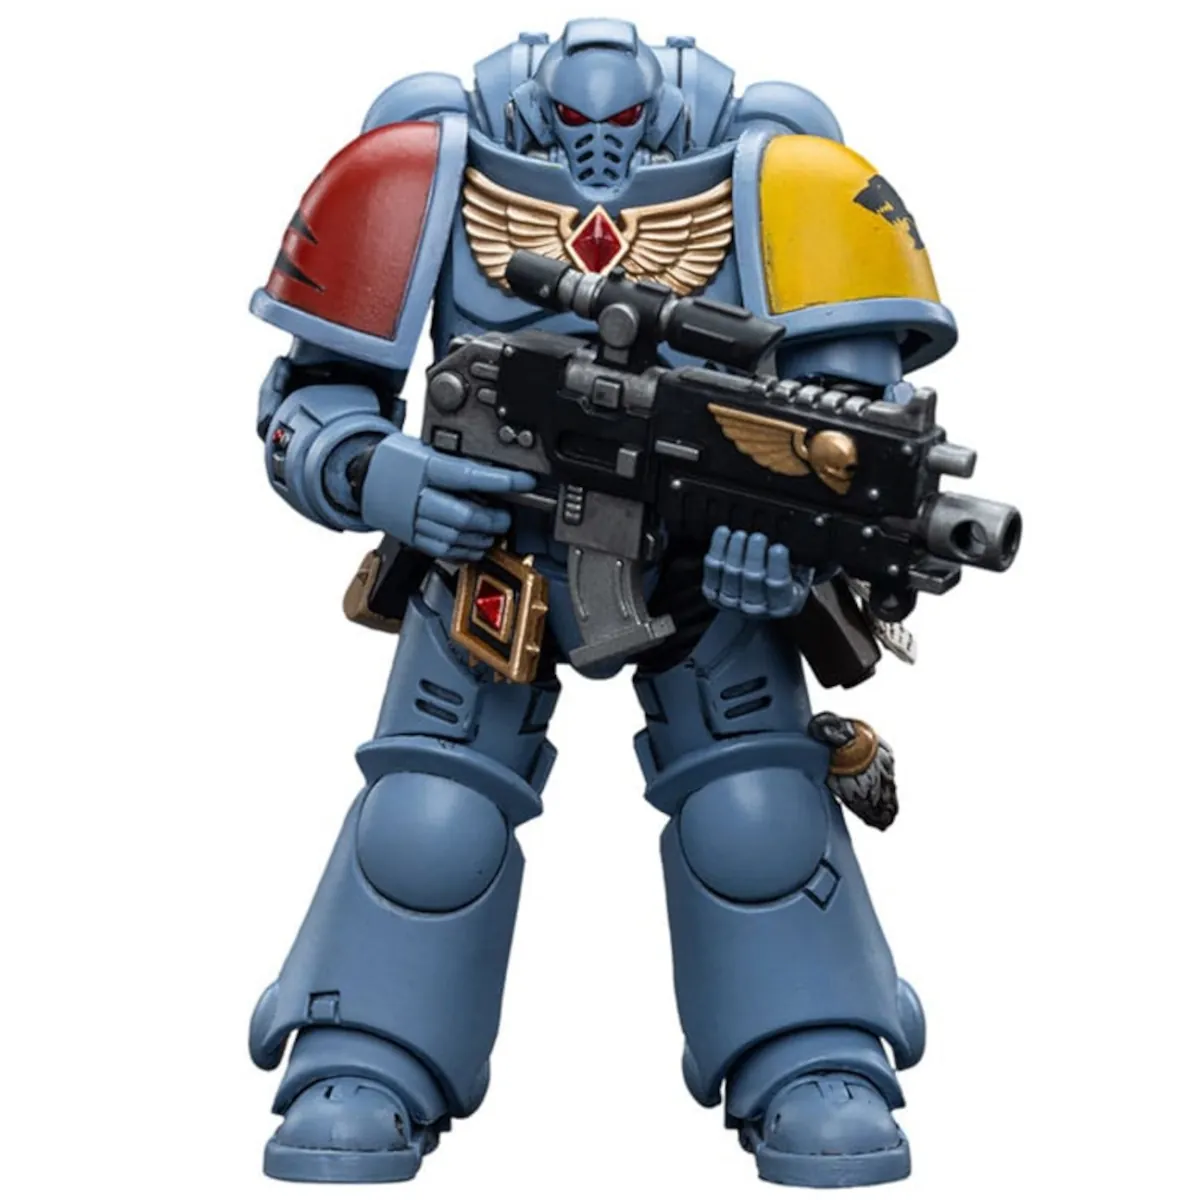 JT6625 Warhammer 40K Space Wolves Intercessors 1-18 Scale Action Figure